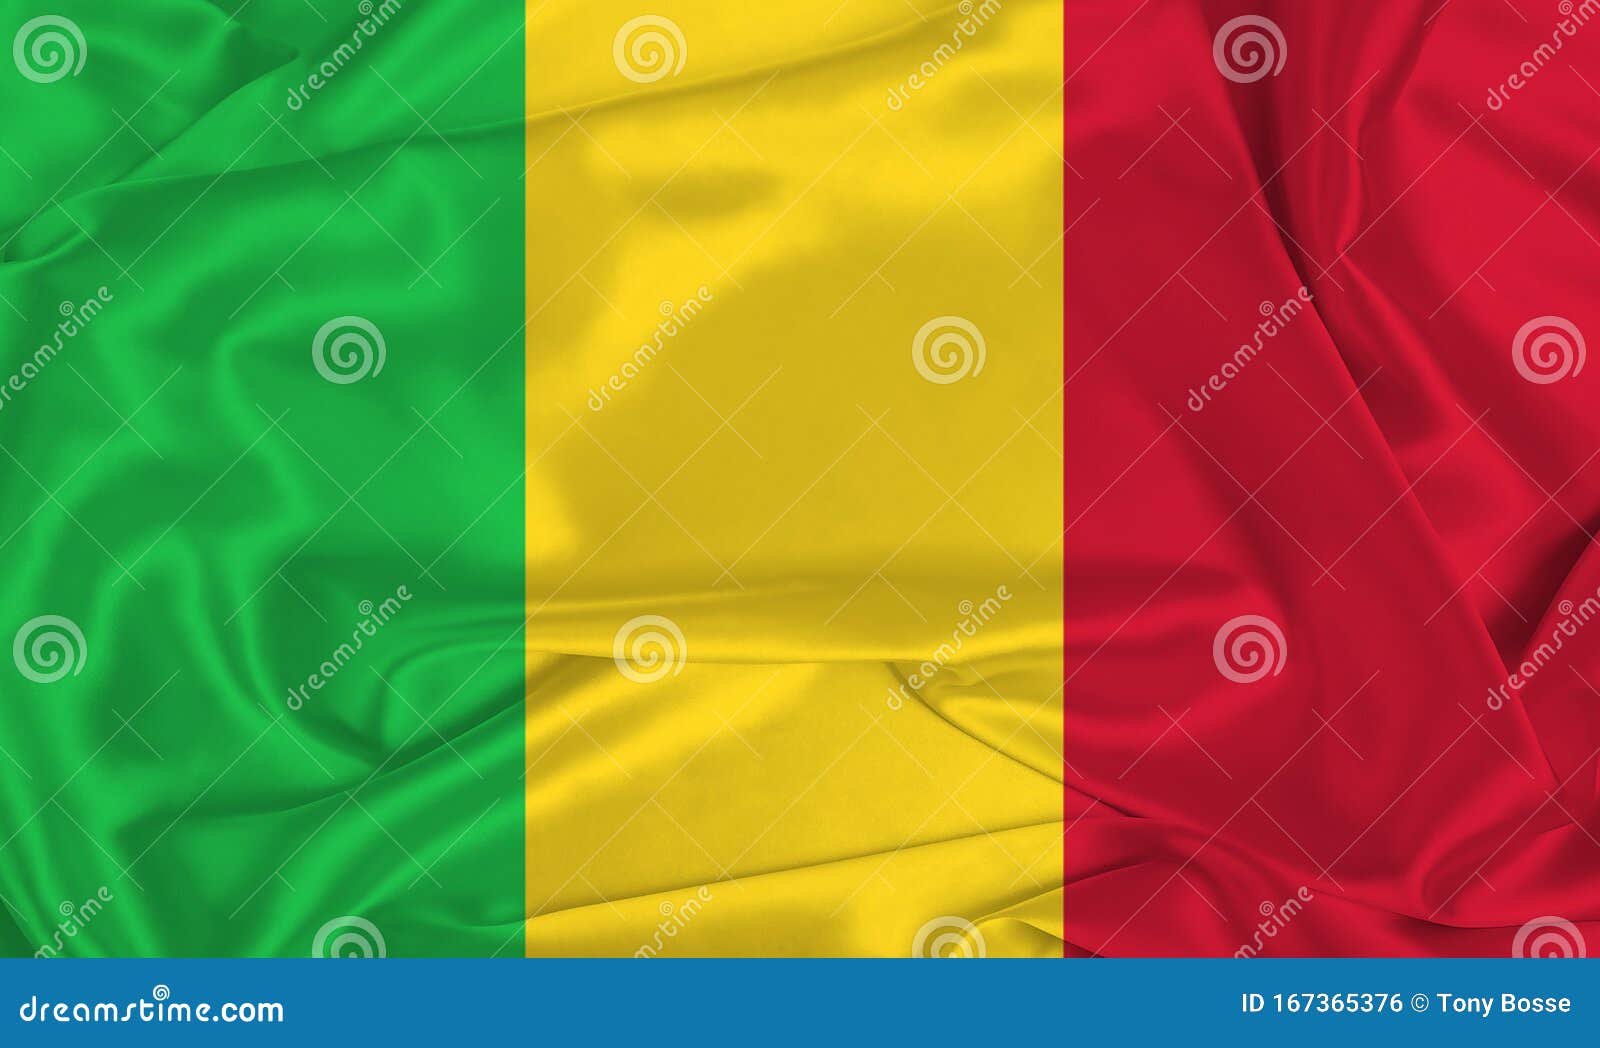 Download wallpapers Mali flag 4k silk wavy flags African countries  national symbols Flag of Mali fabric flags 3D art Mali Africa Mali 3D  flag for desktop with resolution 3840x2400 High Quality HD